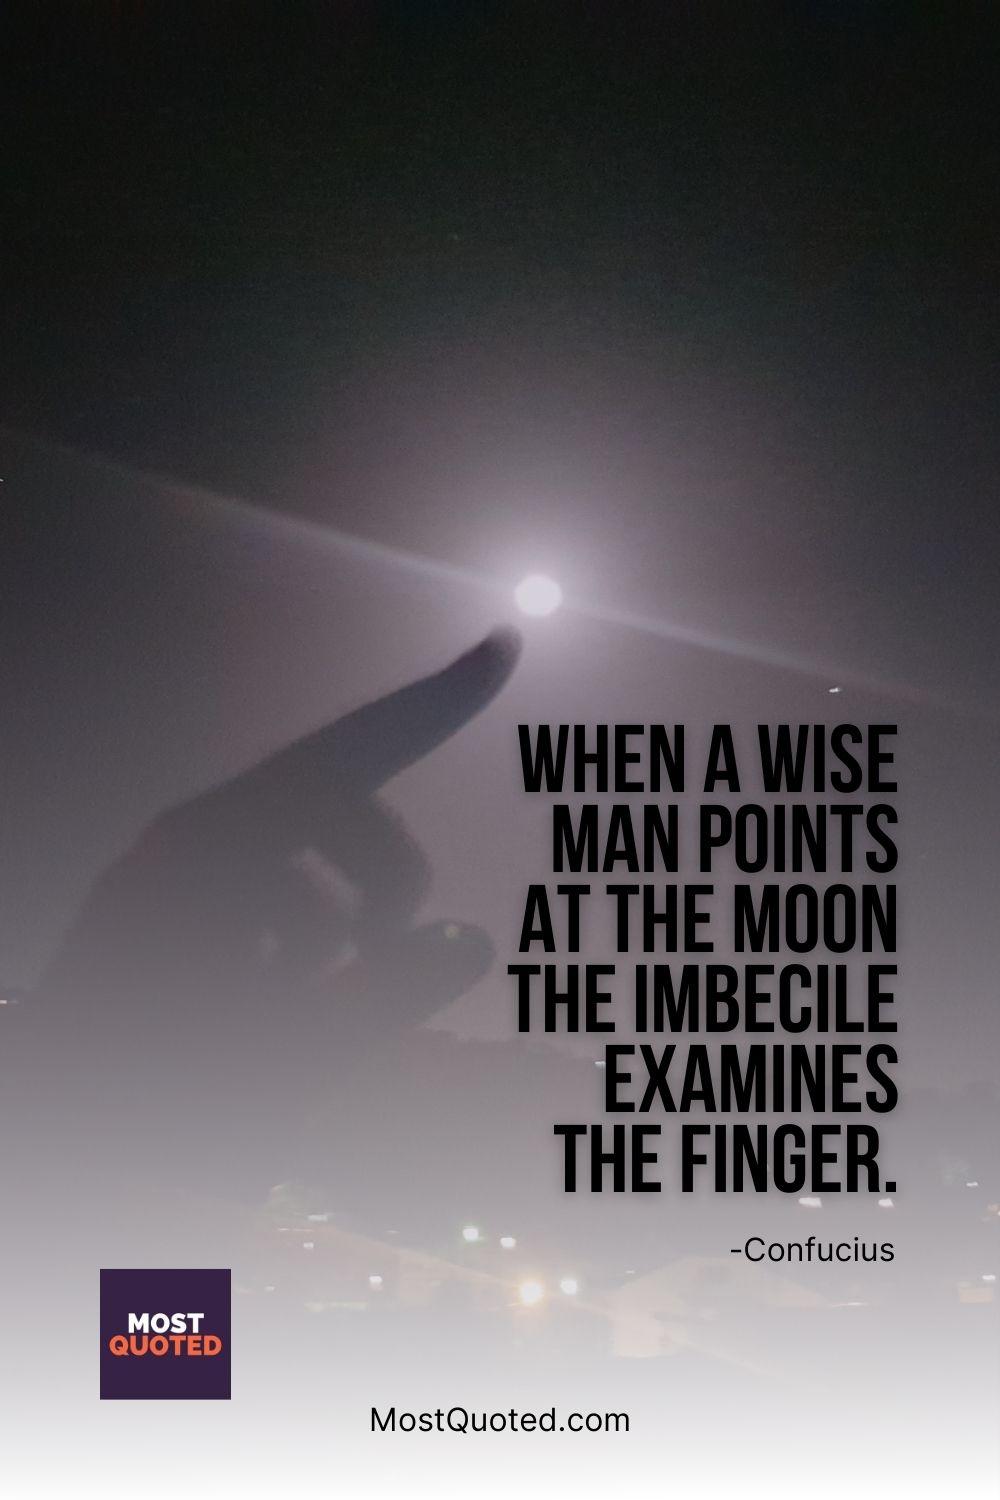 When a wise man points at the moon the imbecile examines the finger. - Confucius